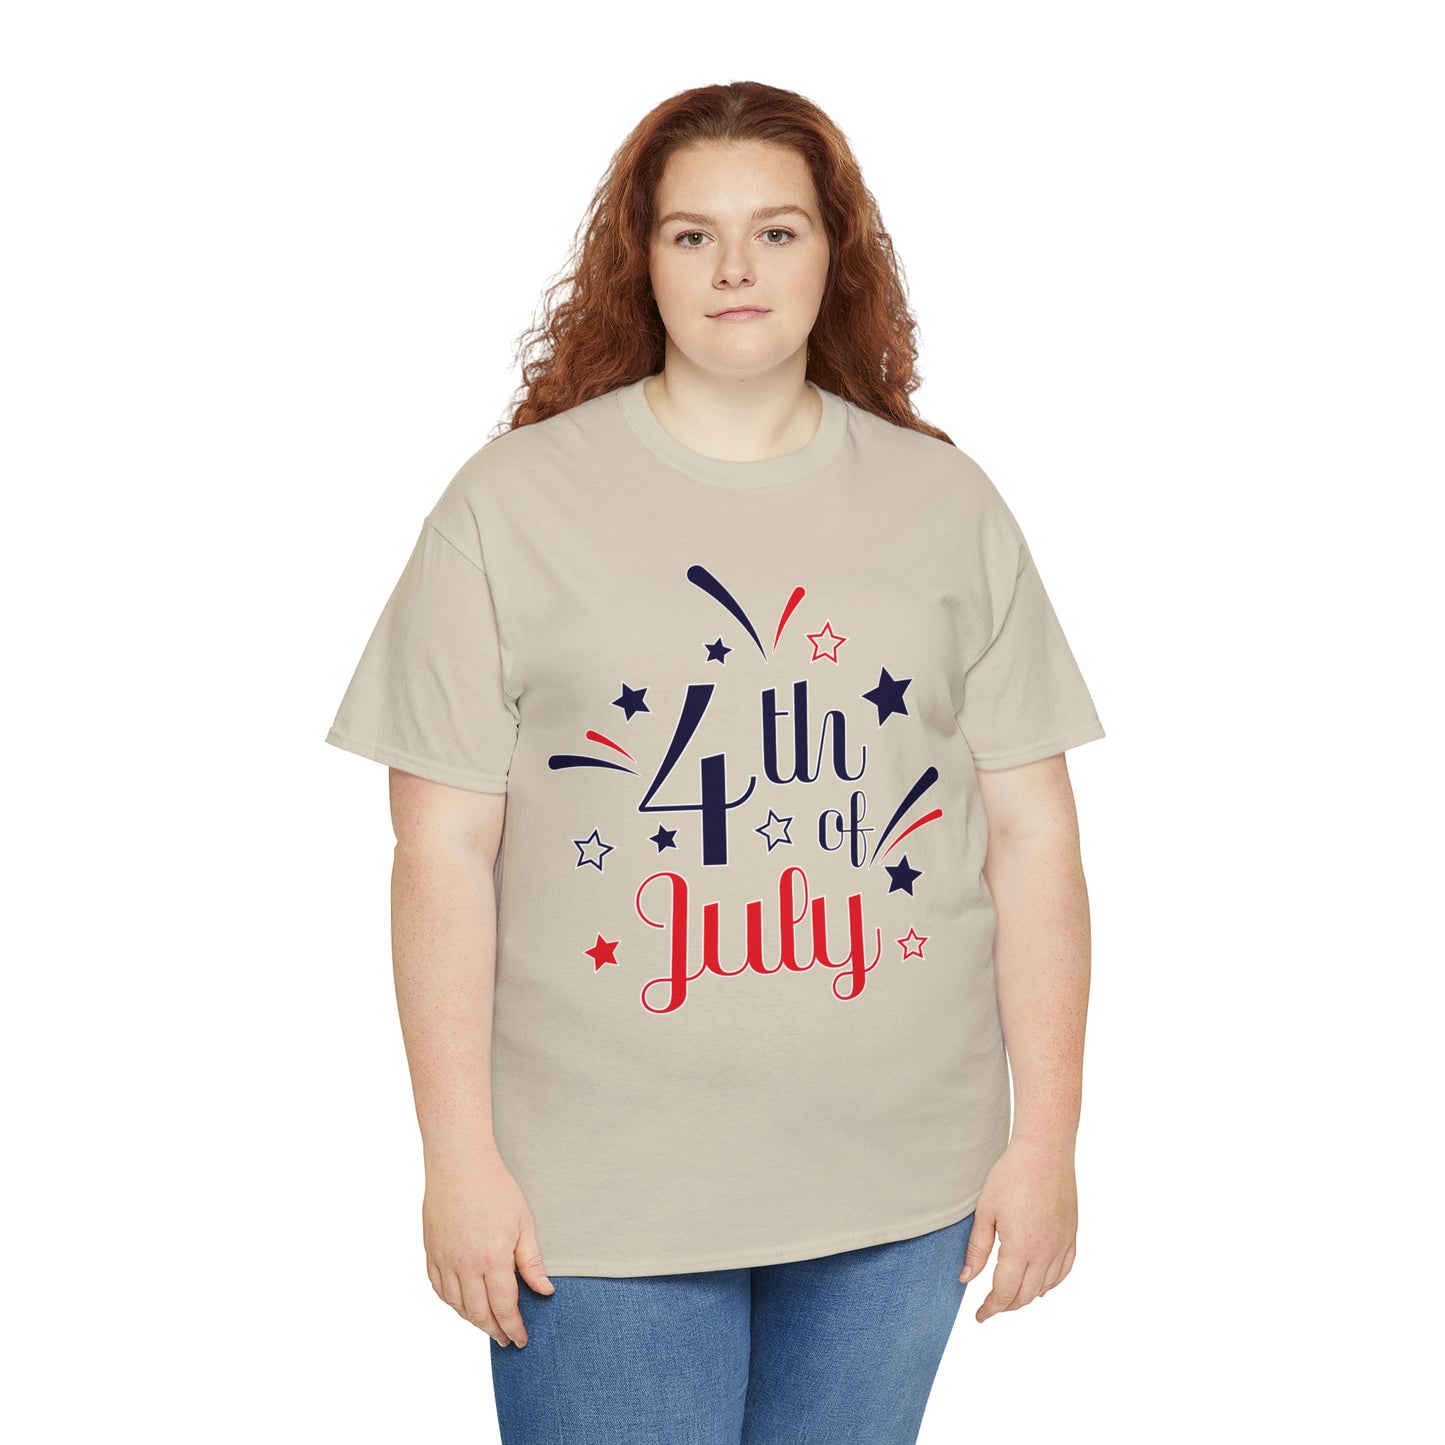 Mock up of the Sand shirt on a plus-size, red-haired, woman